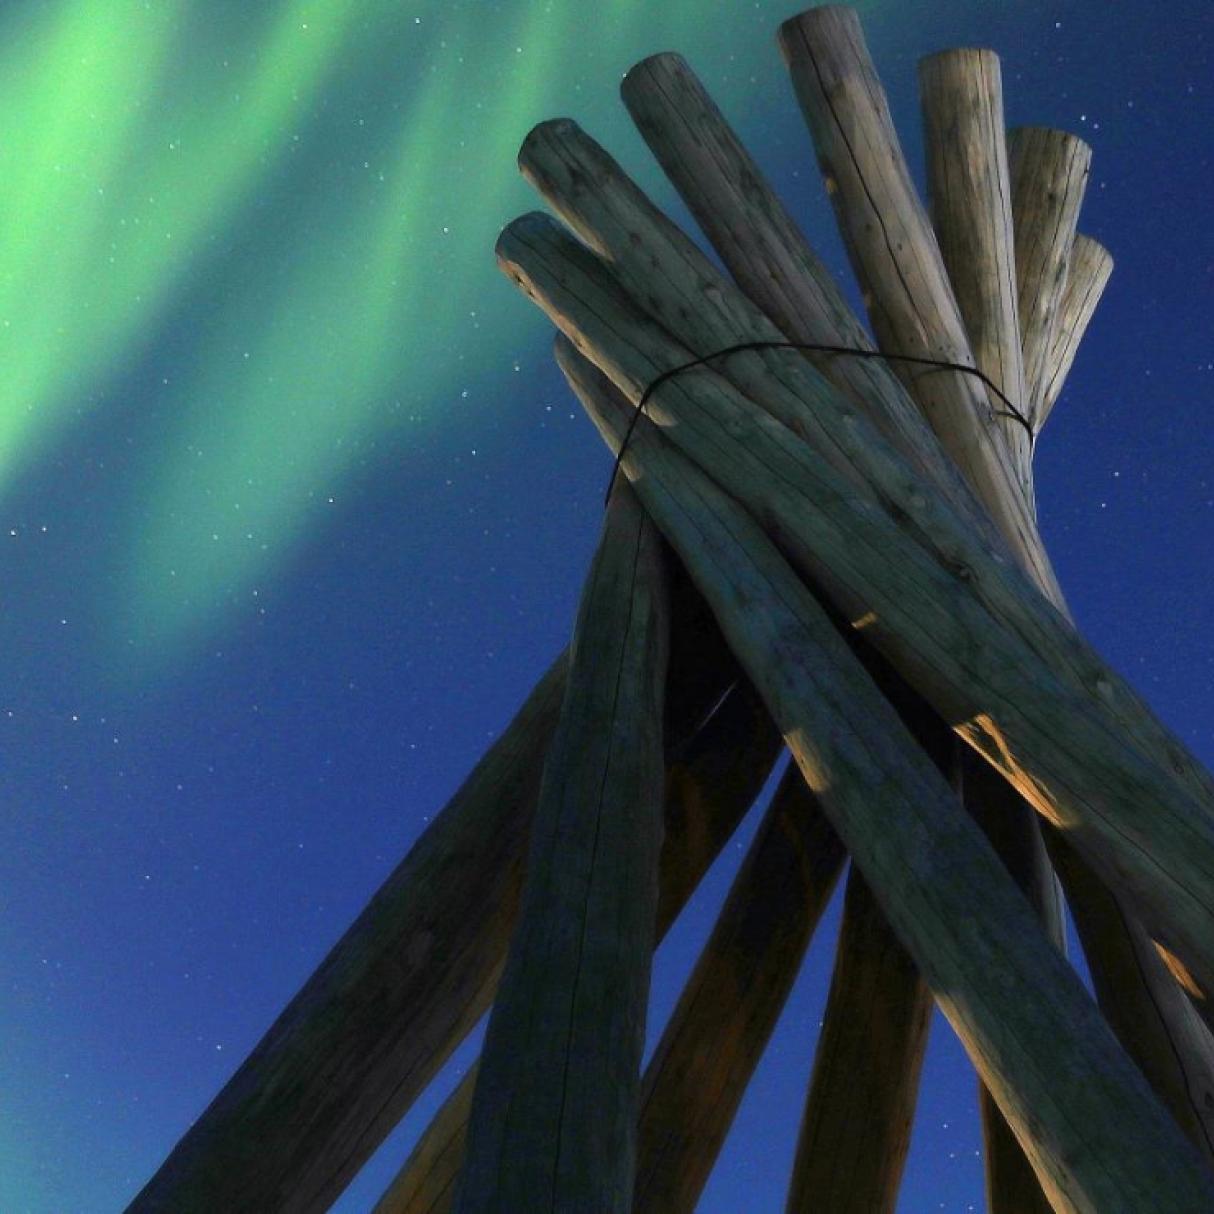 The northern lights over a wood structure